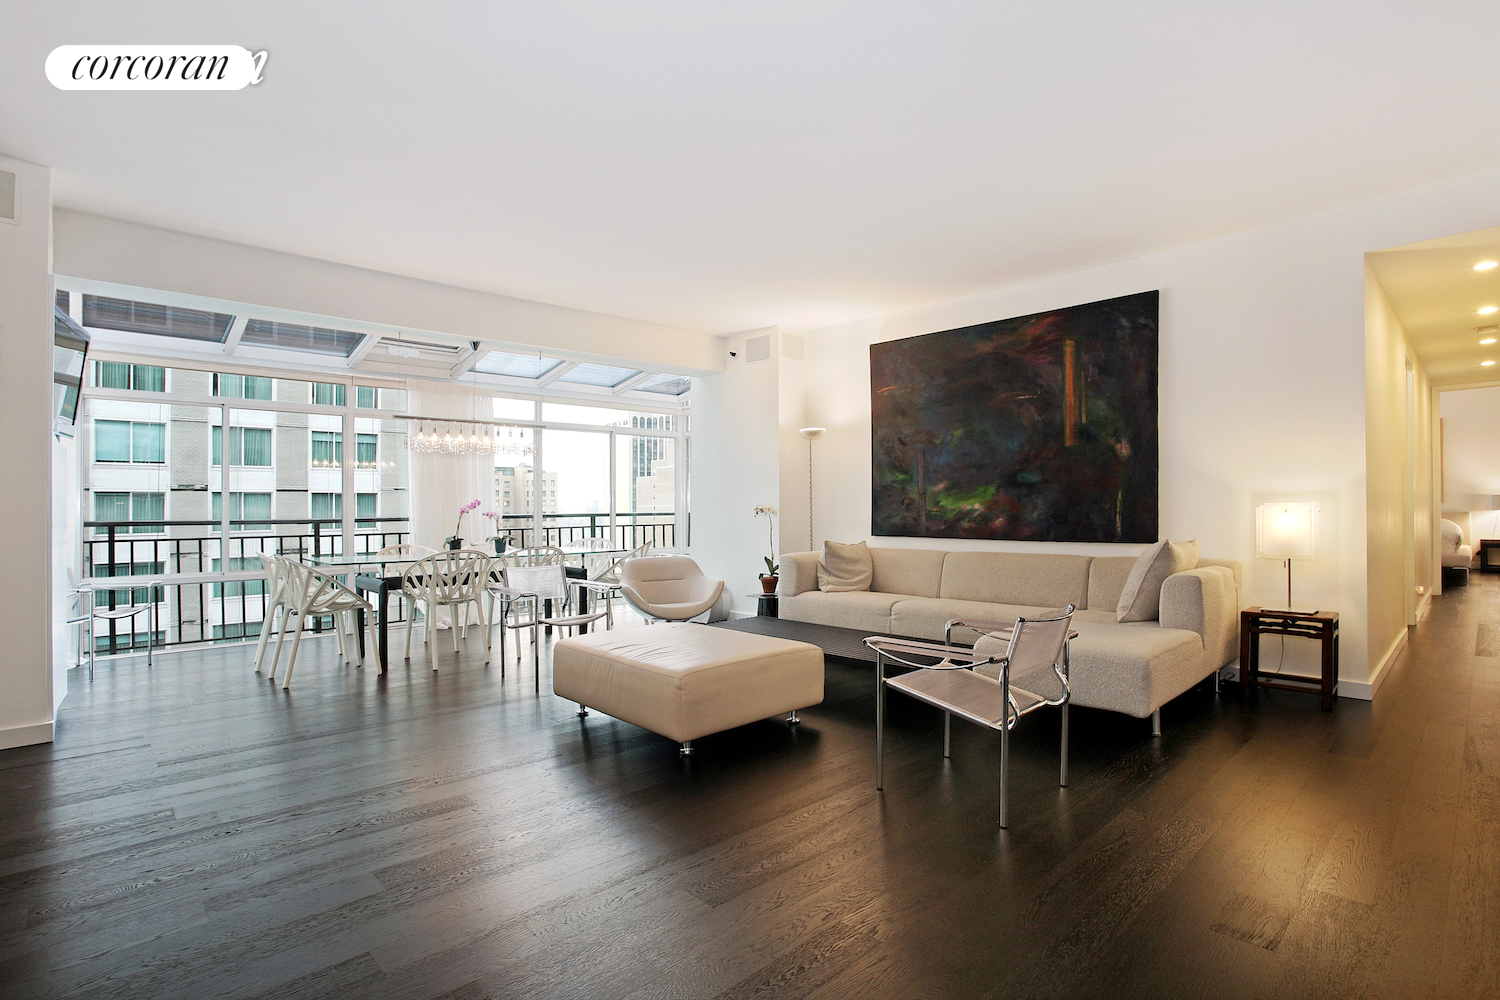 112 West 56th Street Phn, Chelsea And Clinton, Downtown, NYC - 2 Bedrooms  
2.5 Bathrooms  
5 Rooms - 